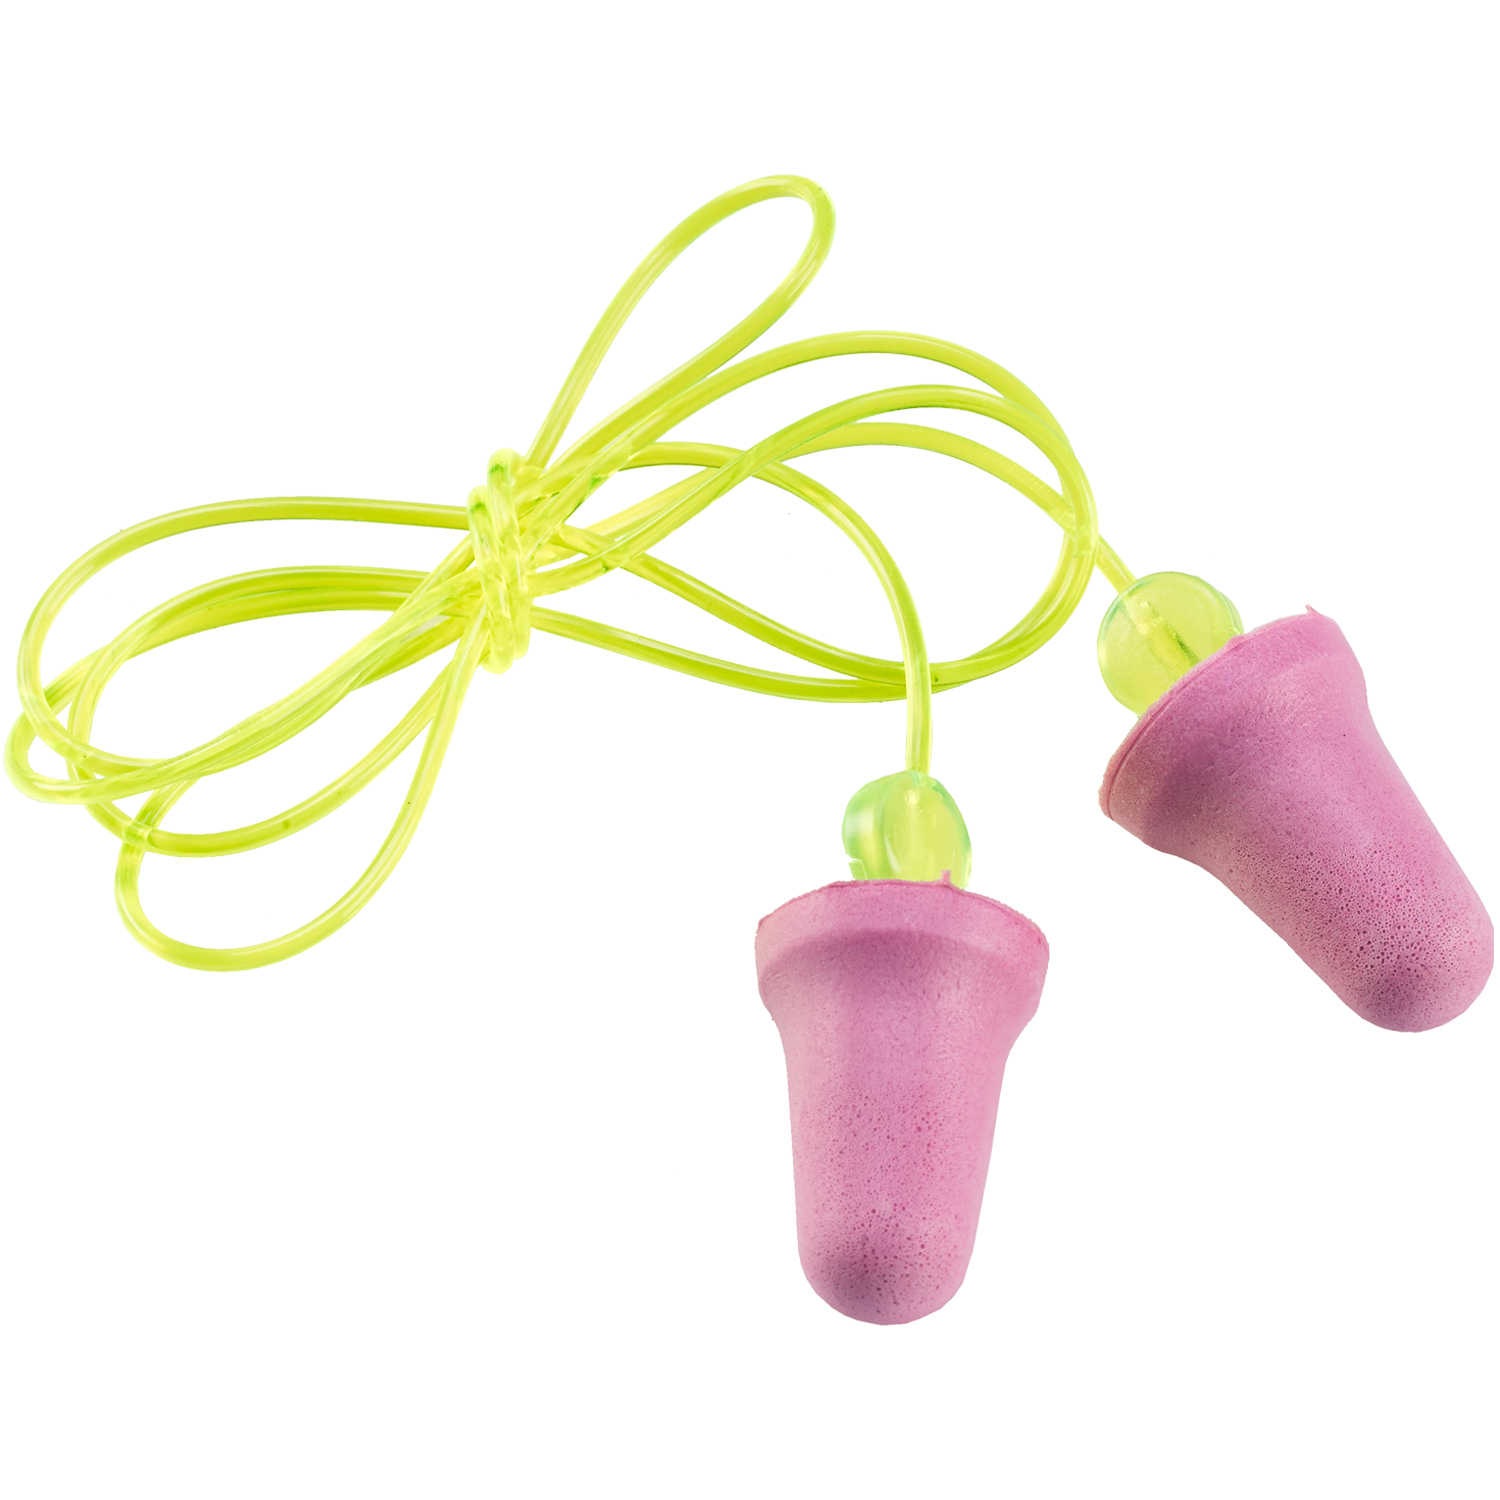 Details about   3M Foam Safety Neon Earplugs Workplace Noise Reduction Uncorded Disposable Plug 